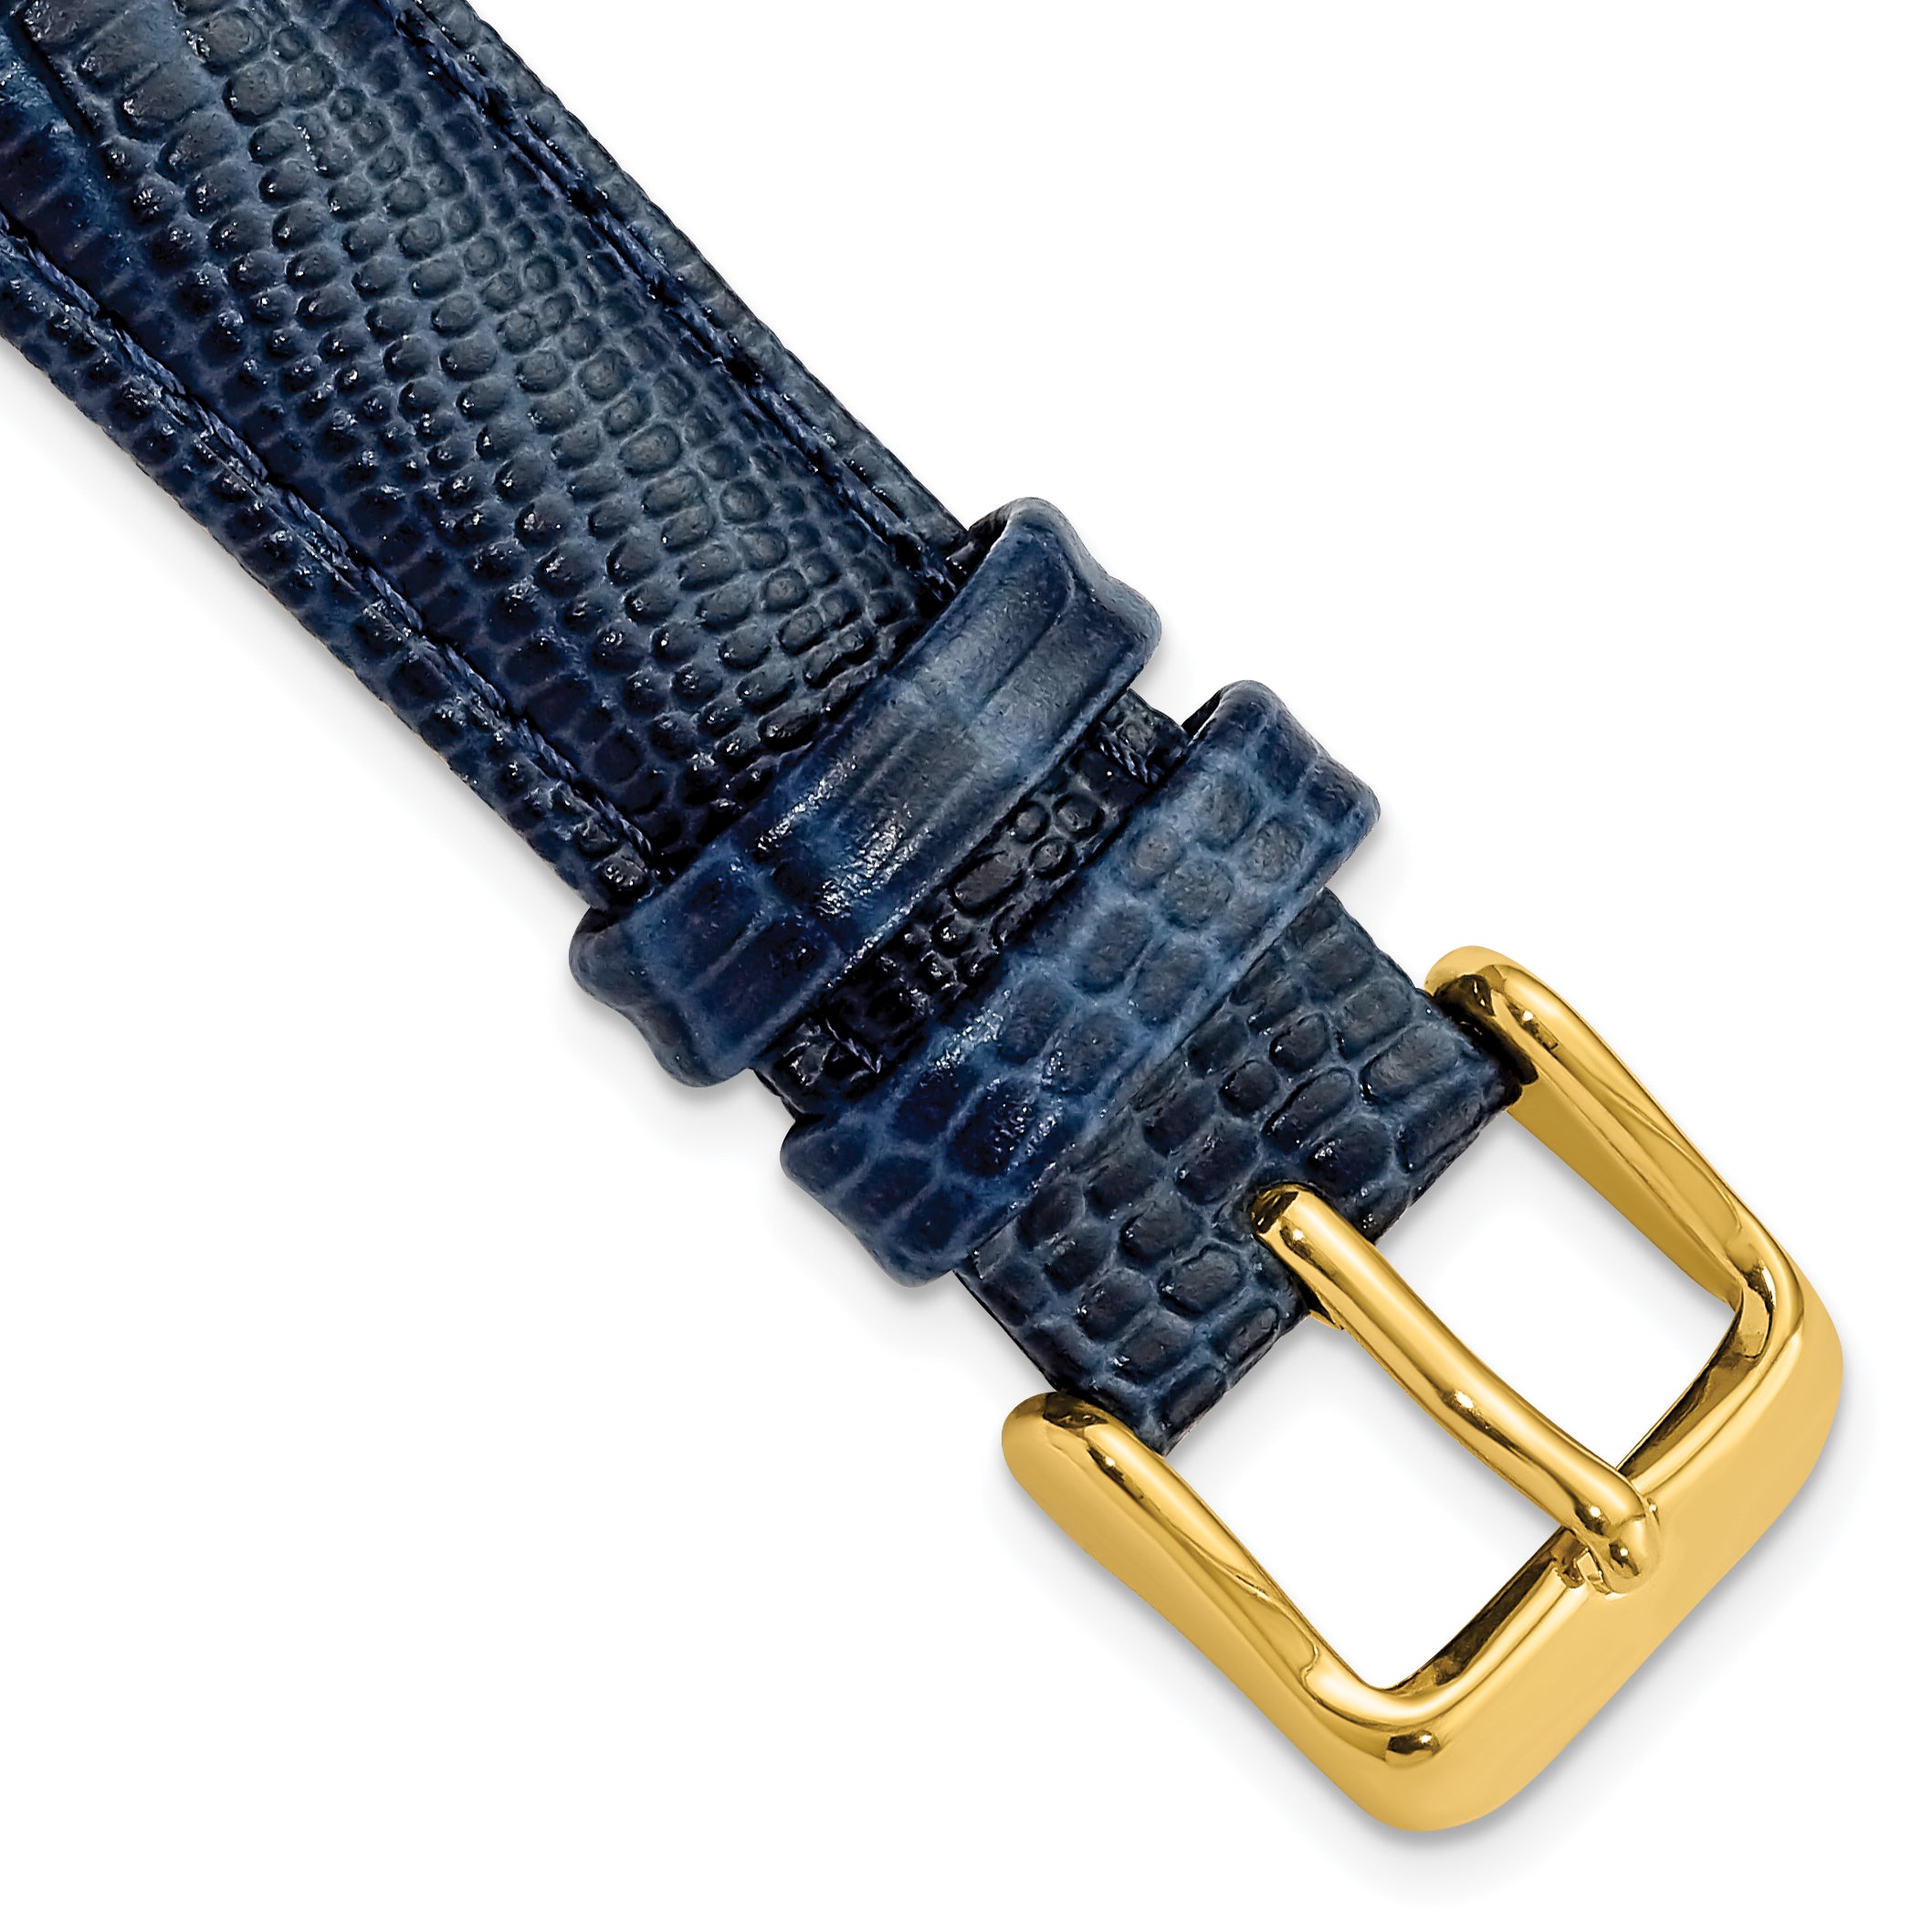 DeBeer 16mm Navy Teju Liz Grain Leather with Gold-tone Buckle 7.5 inch Watch Band